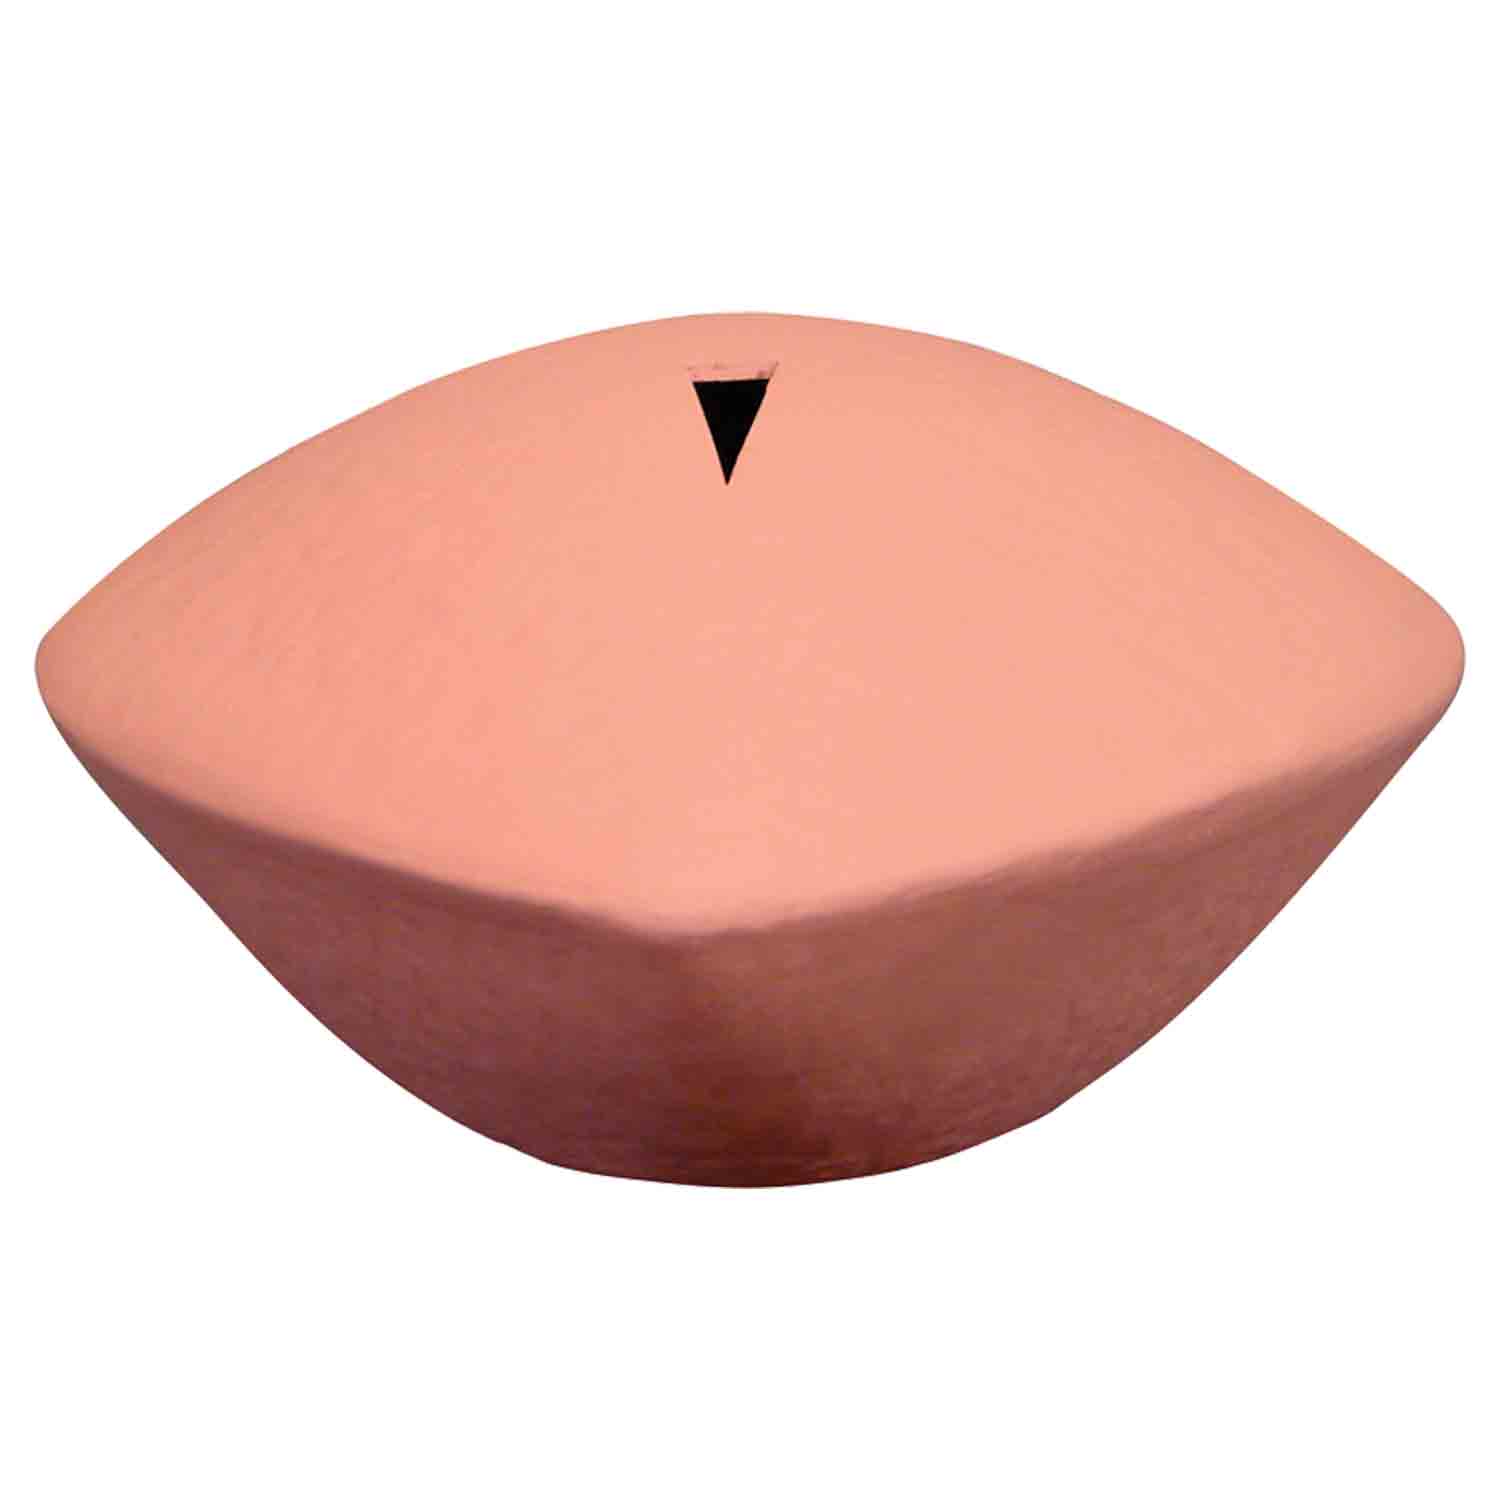 Memento Biodegradable Water Urn for Ashes in Coral Pink